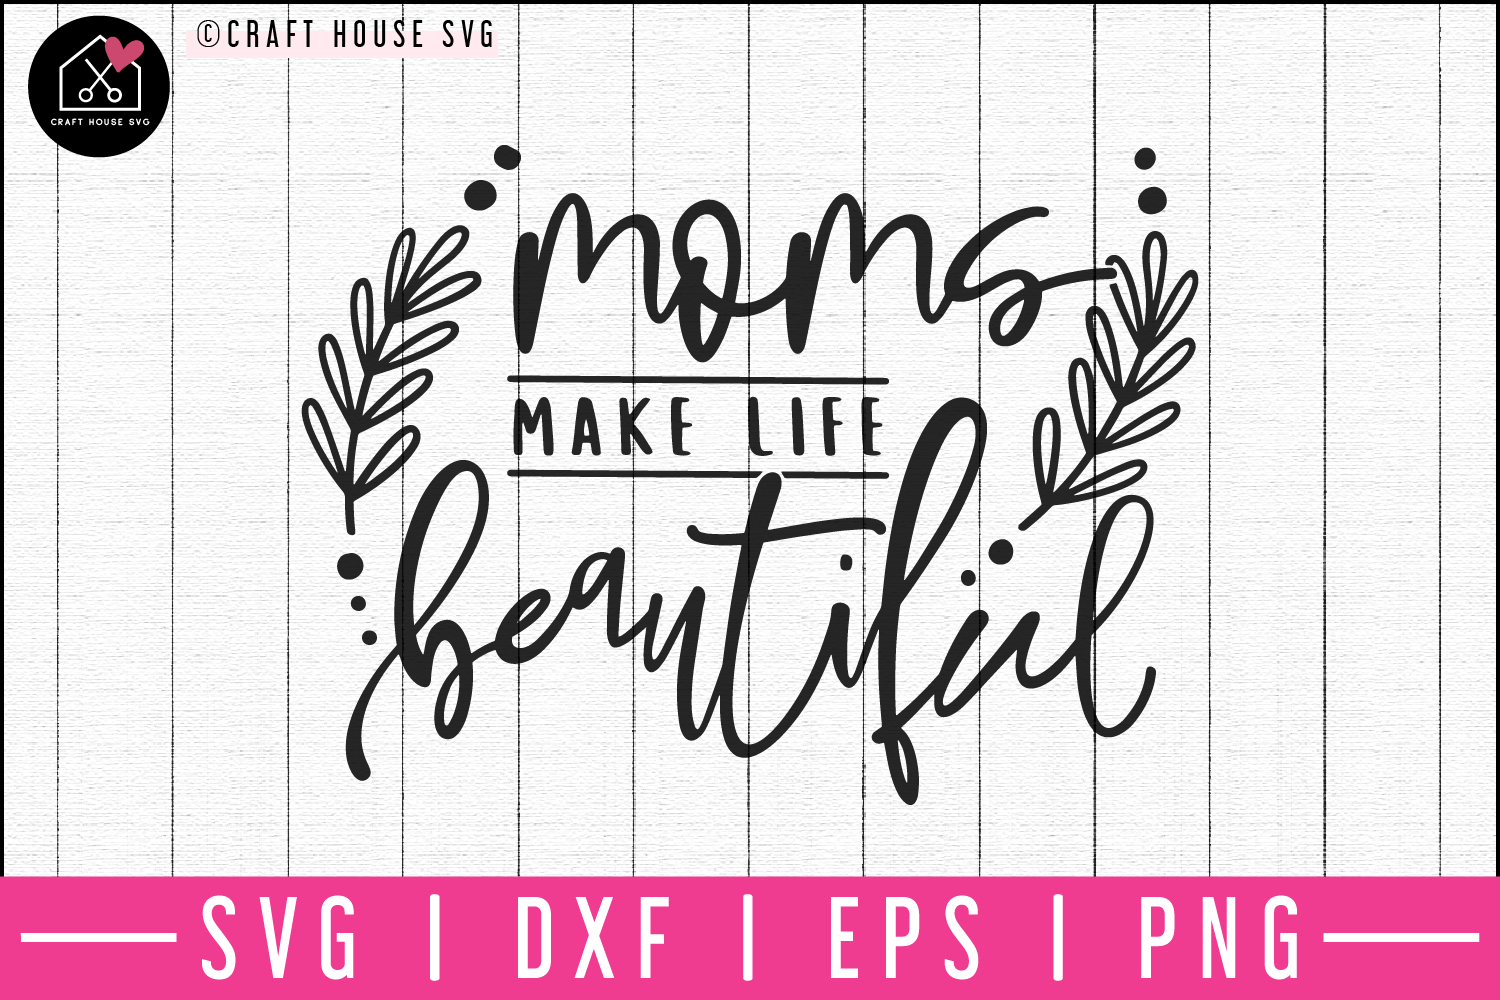 Moms make life beautiful SVG | M52F Craft House SVG - SVG files for Cricut and Silhouette